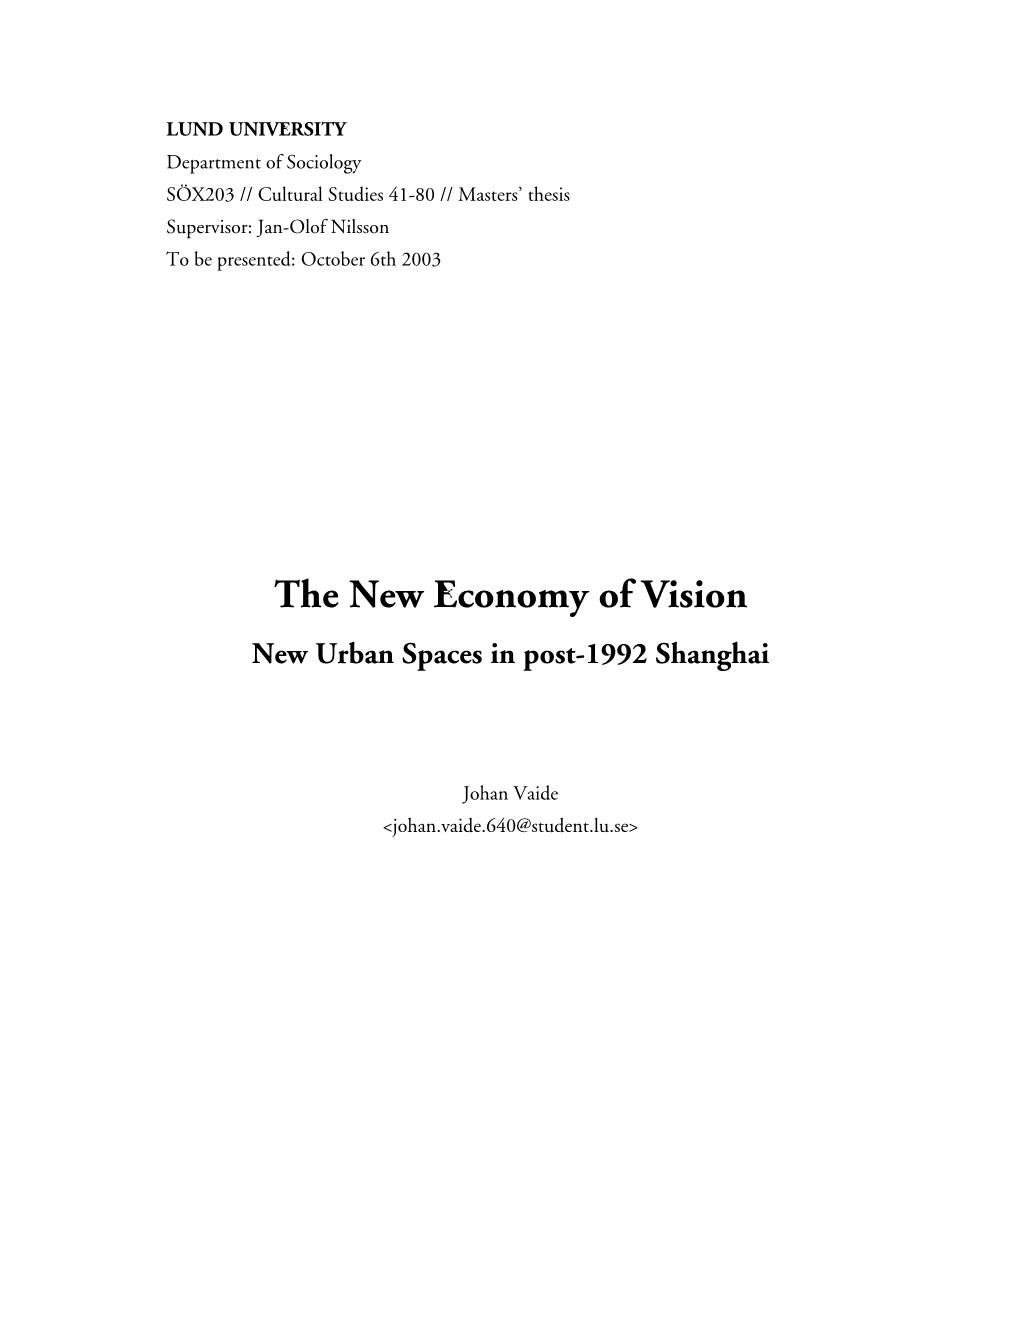 The New Economy of Vision New Urban Spaces in Post-1992 Shanghai